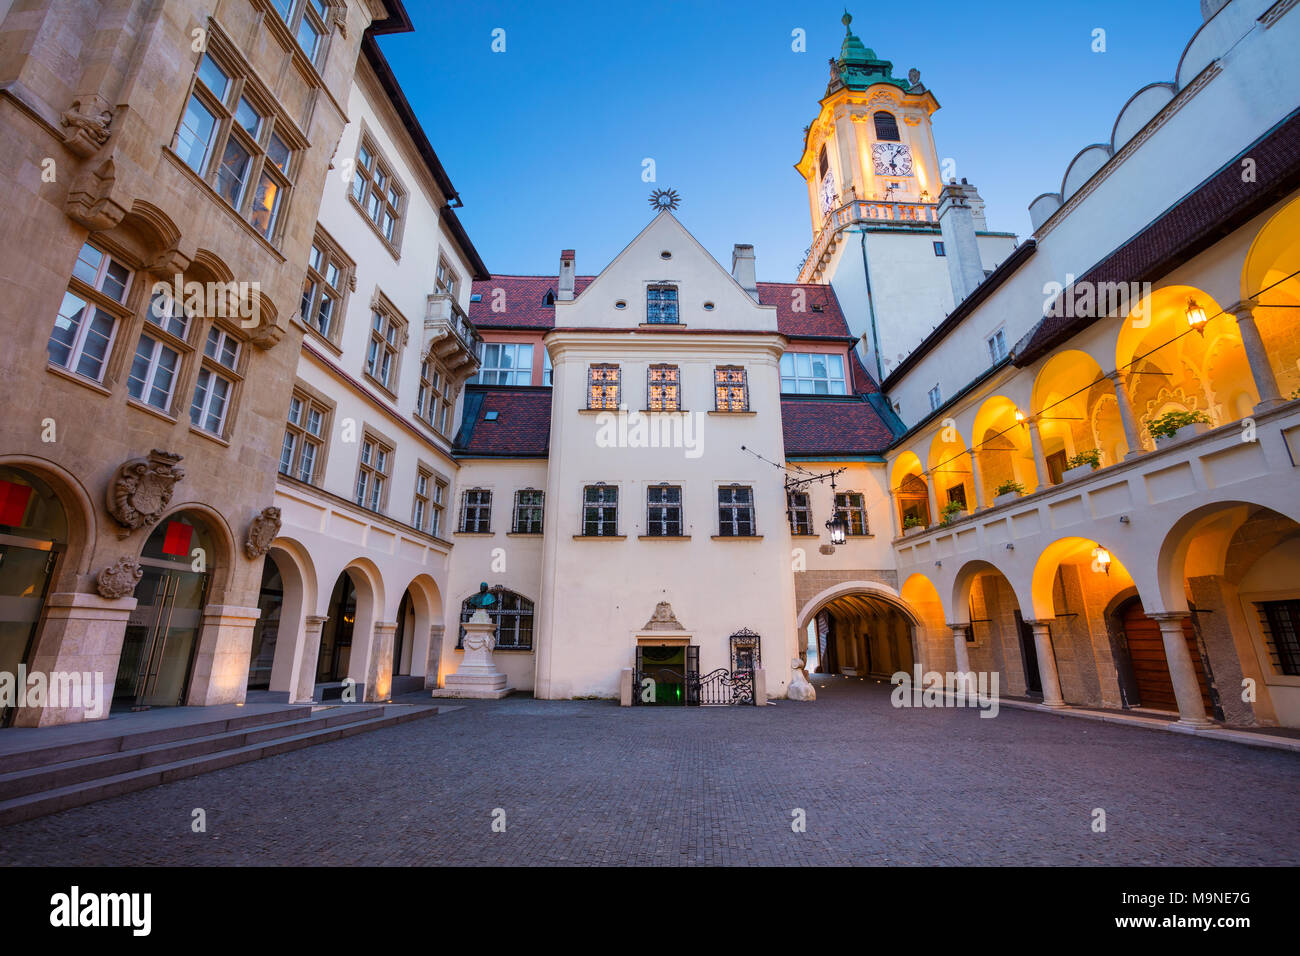 Old Town Hall in Bratislava. Image of Town Hall Buildings and Clock Tower of Main City Square in Old Town Bratislava, Slovakia. Stock Photo